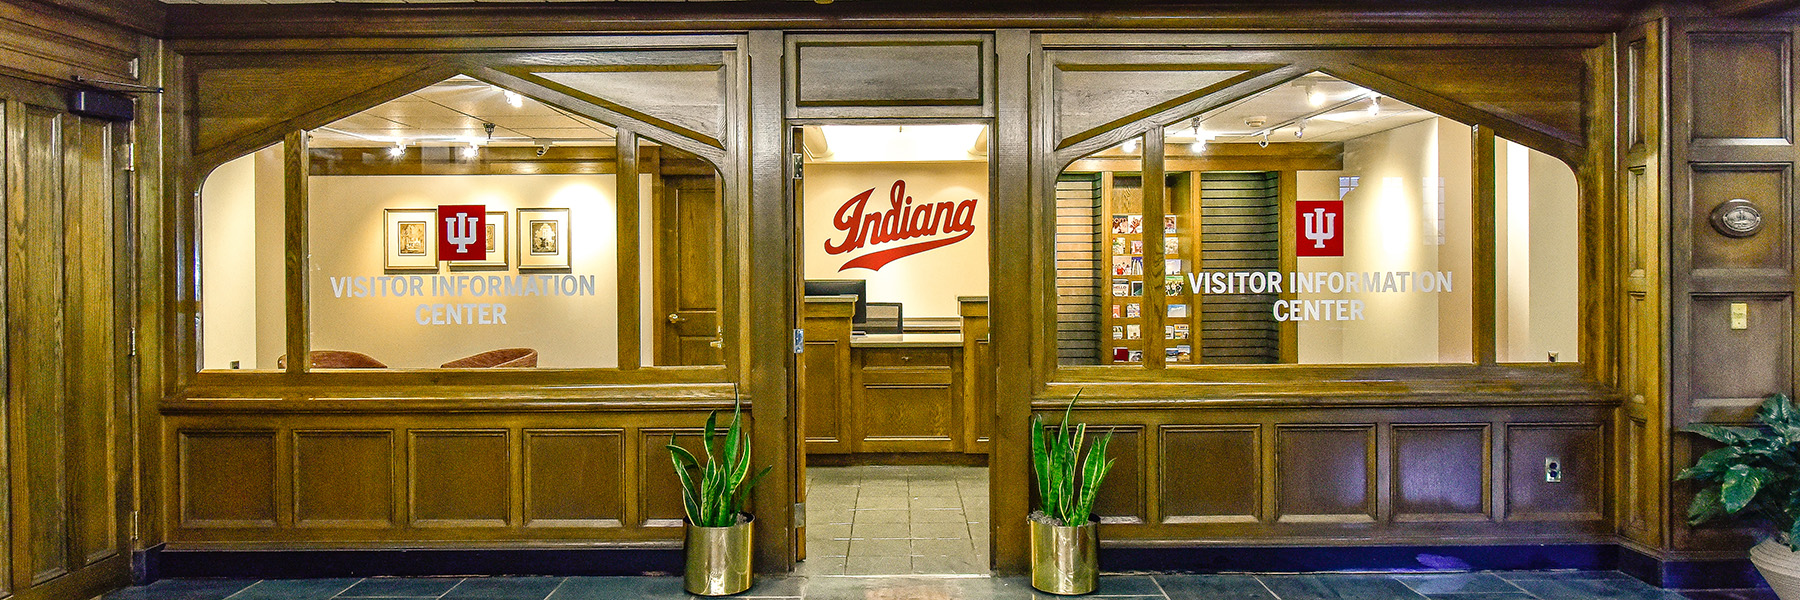 Indiana University Visitor Center inside office front.